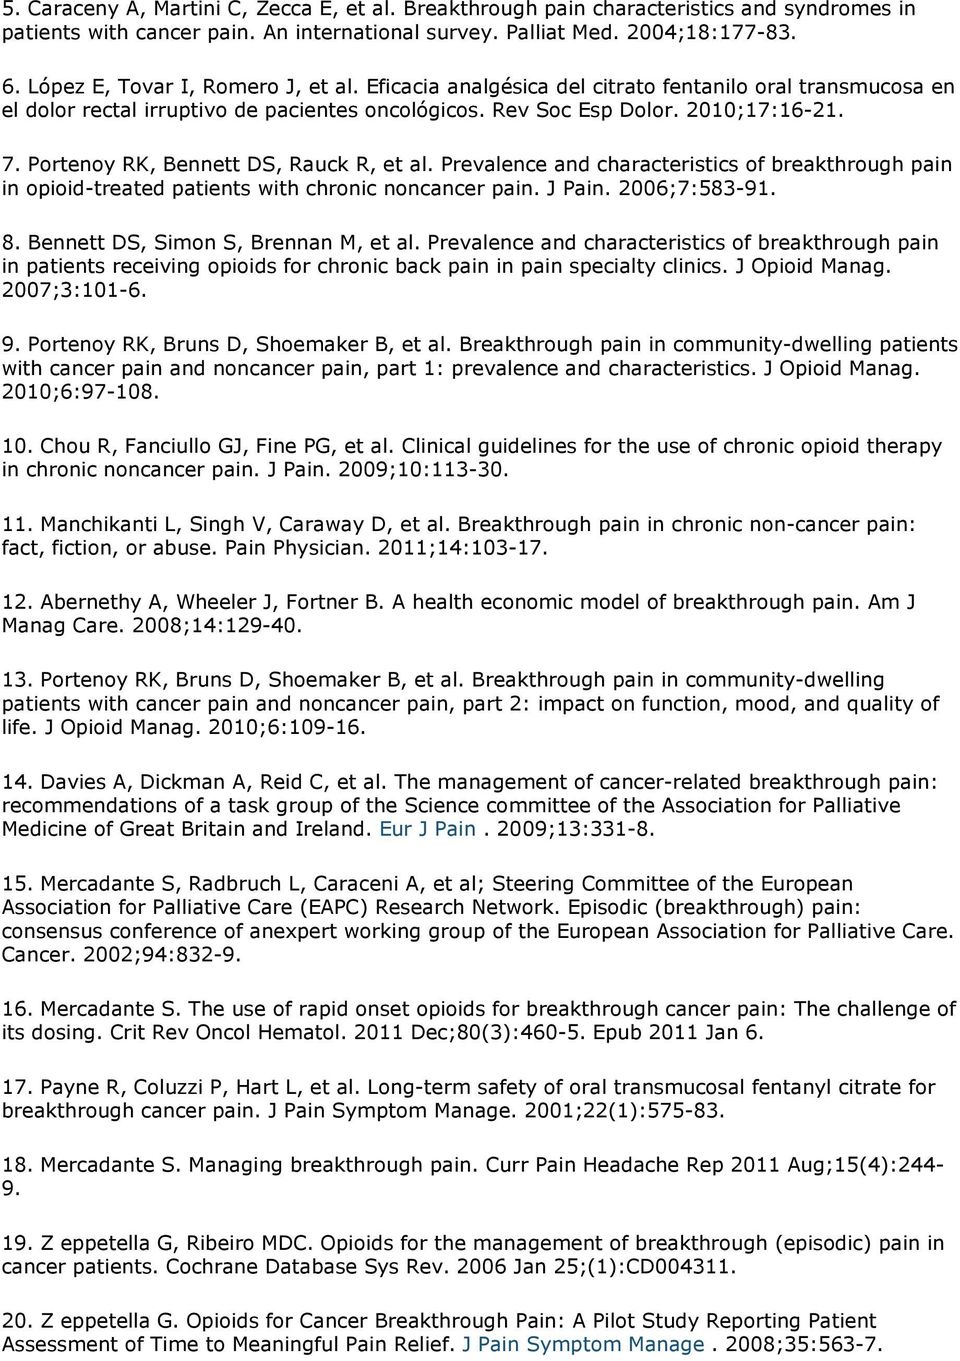 Portenoy RK, Bennett DS, Rauck R, et al. Prevalence and characteristics of breakthrough pain in opioid-treated patients with chronic noncancer pain. J Pain. 2006;7:583-91. 8.